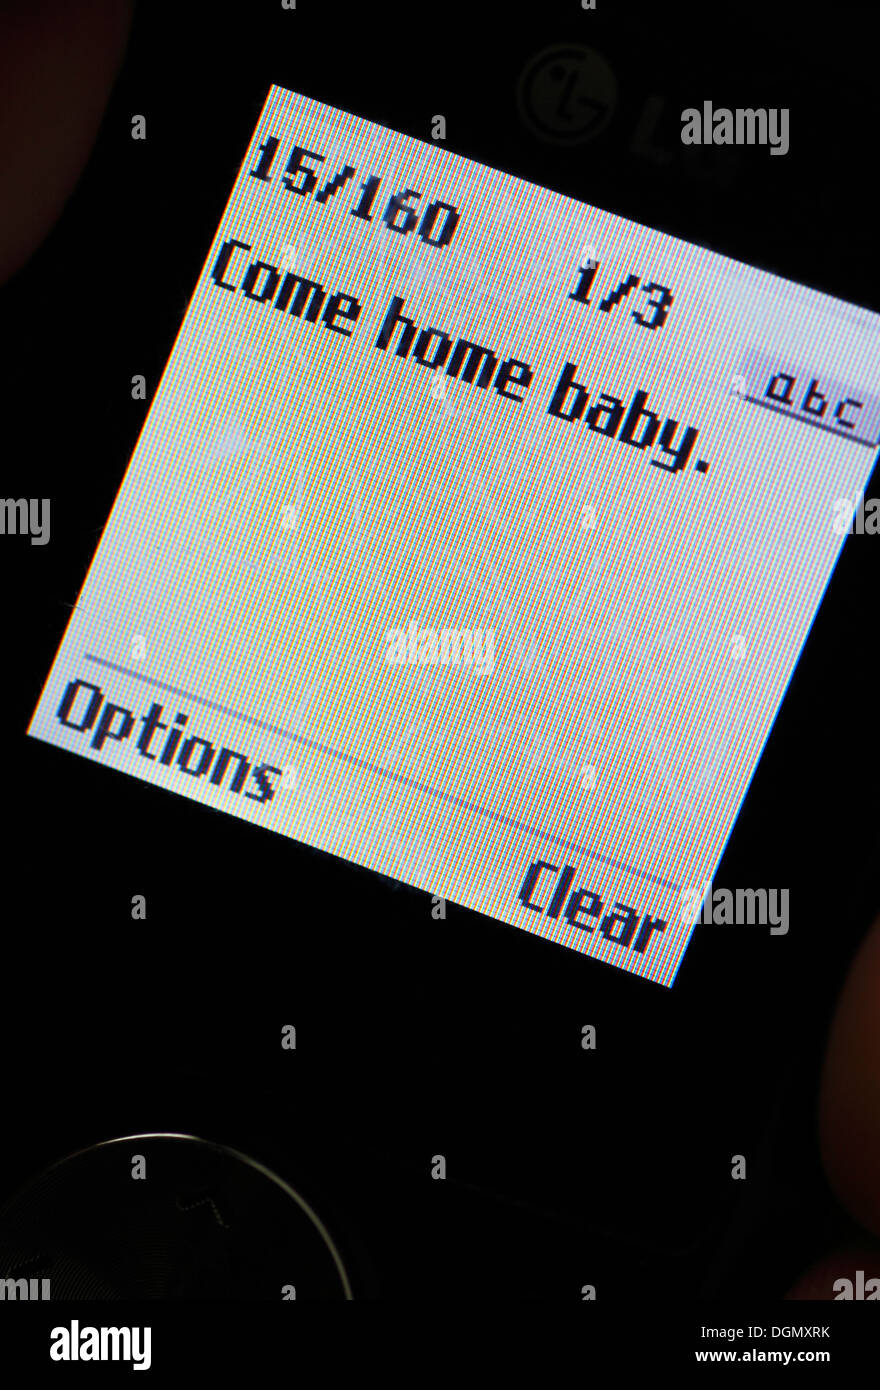 Mobile phone displaying the test message 'Come home baby'. Stock Photo